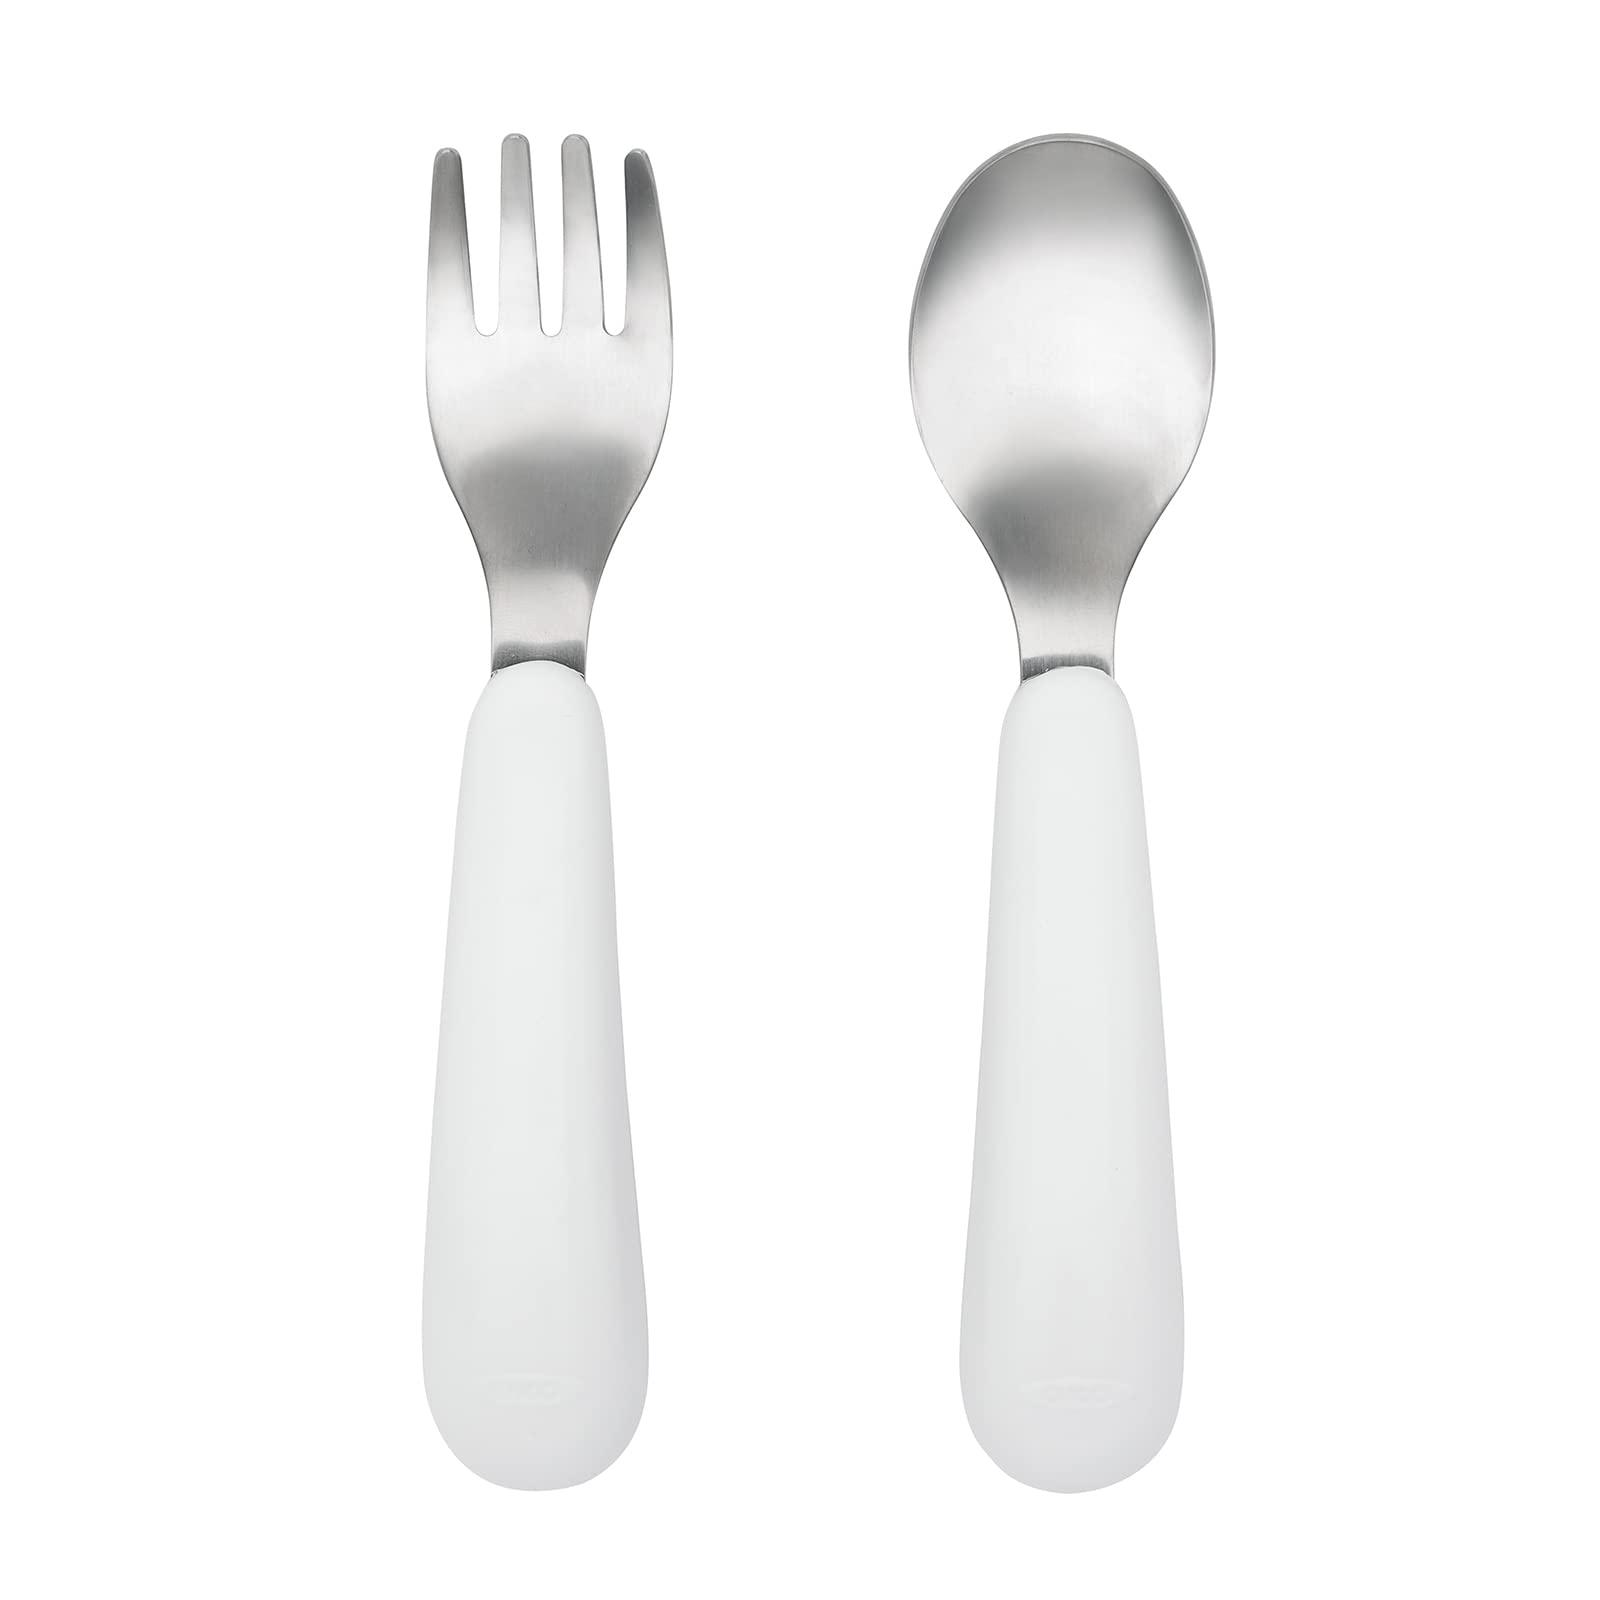 oxo tot fork & spoon set- pink